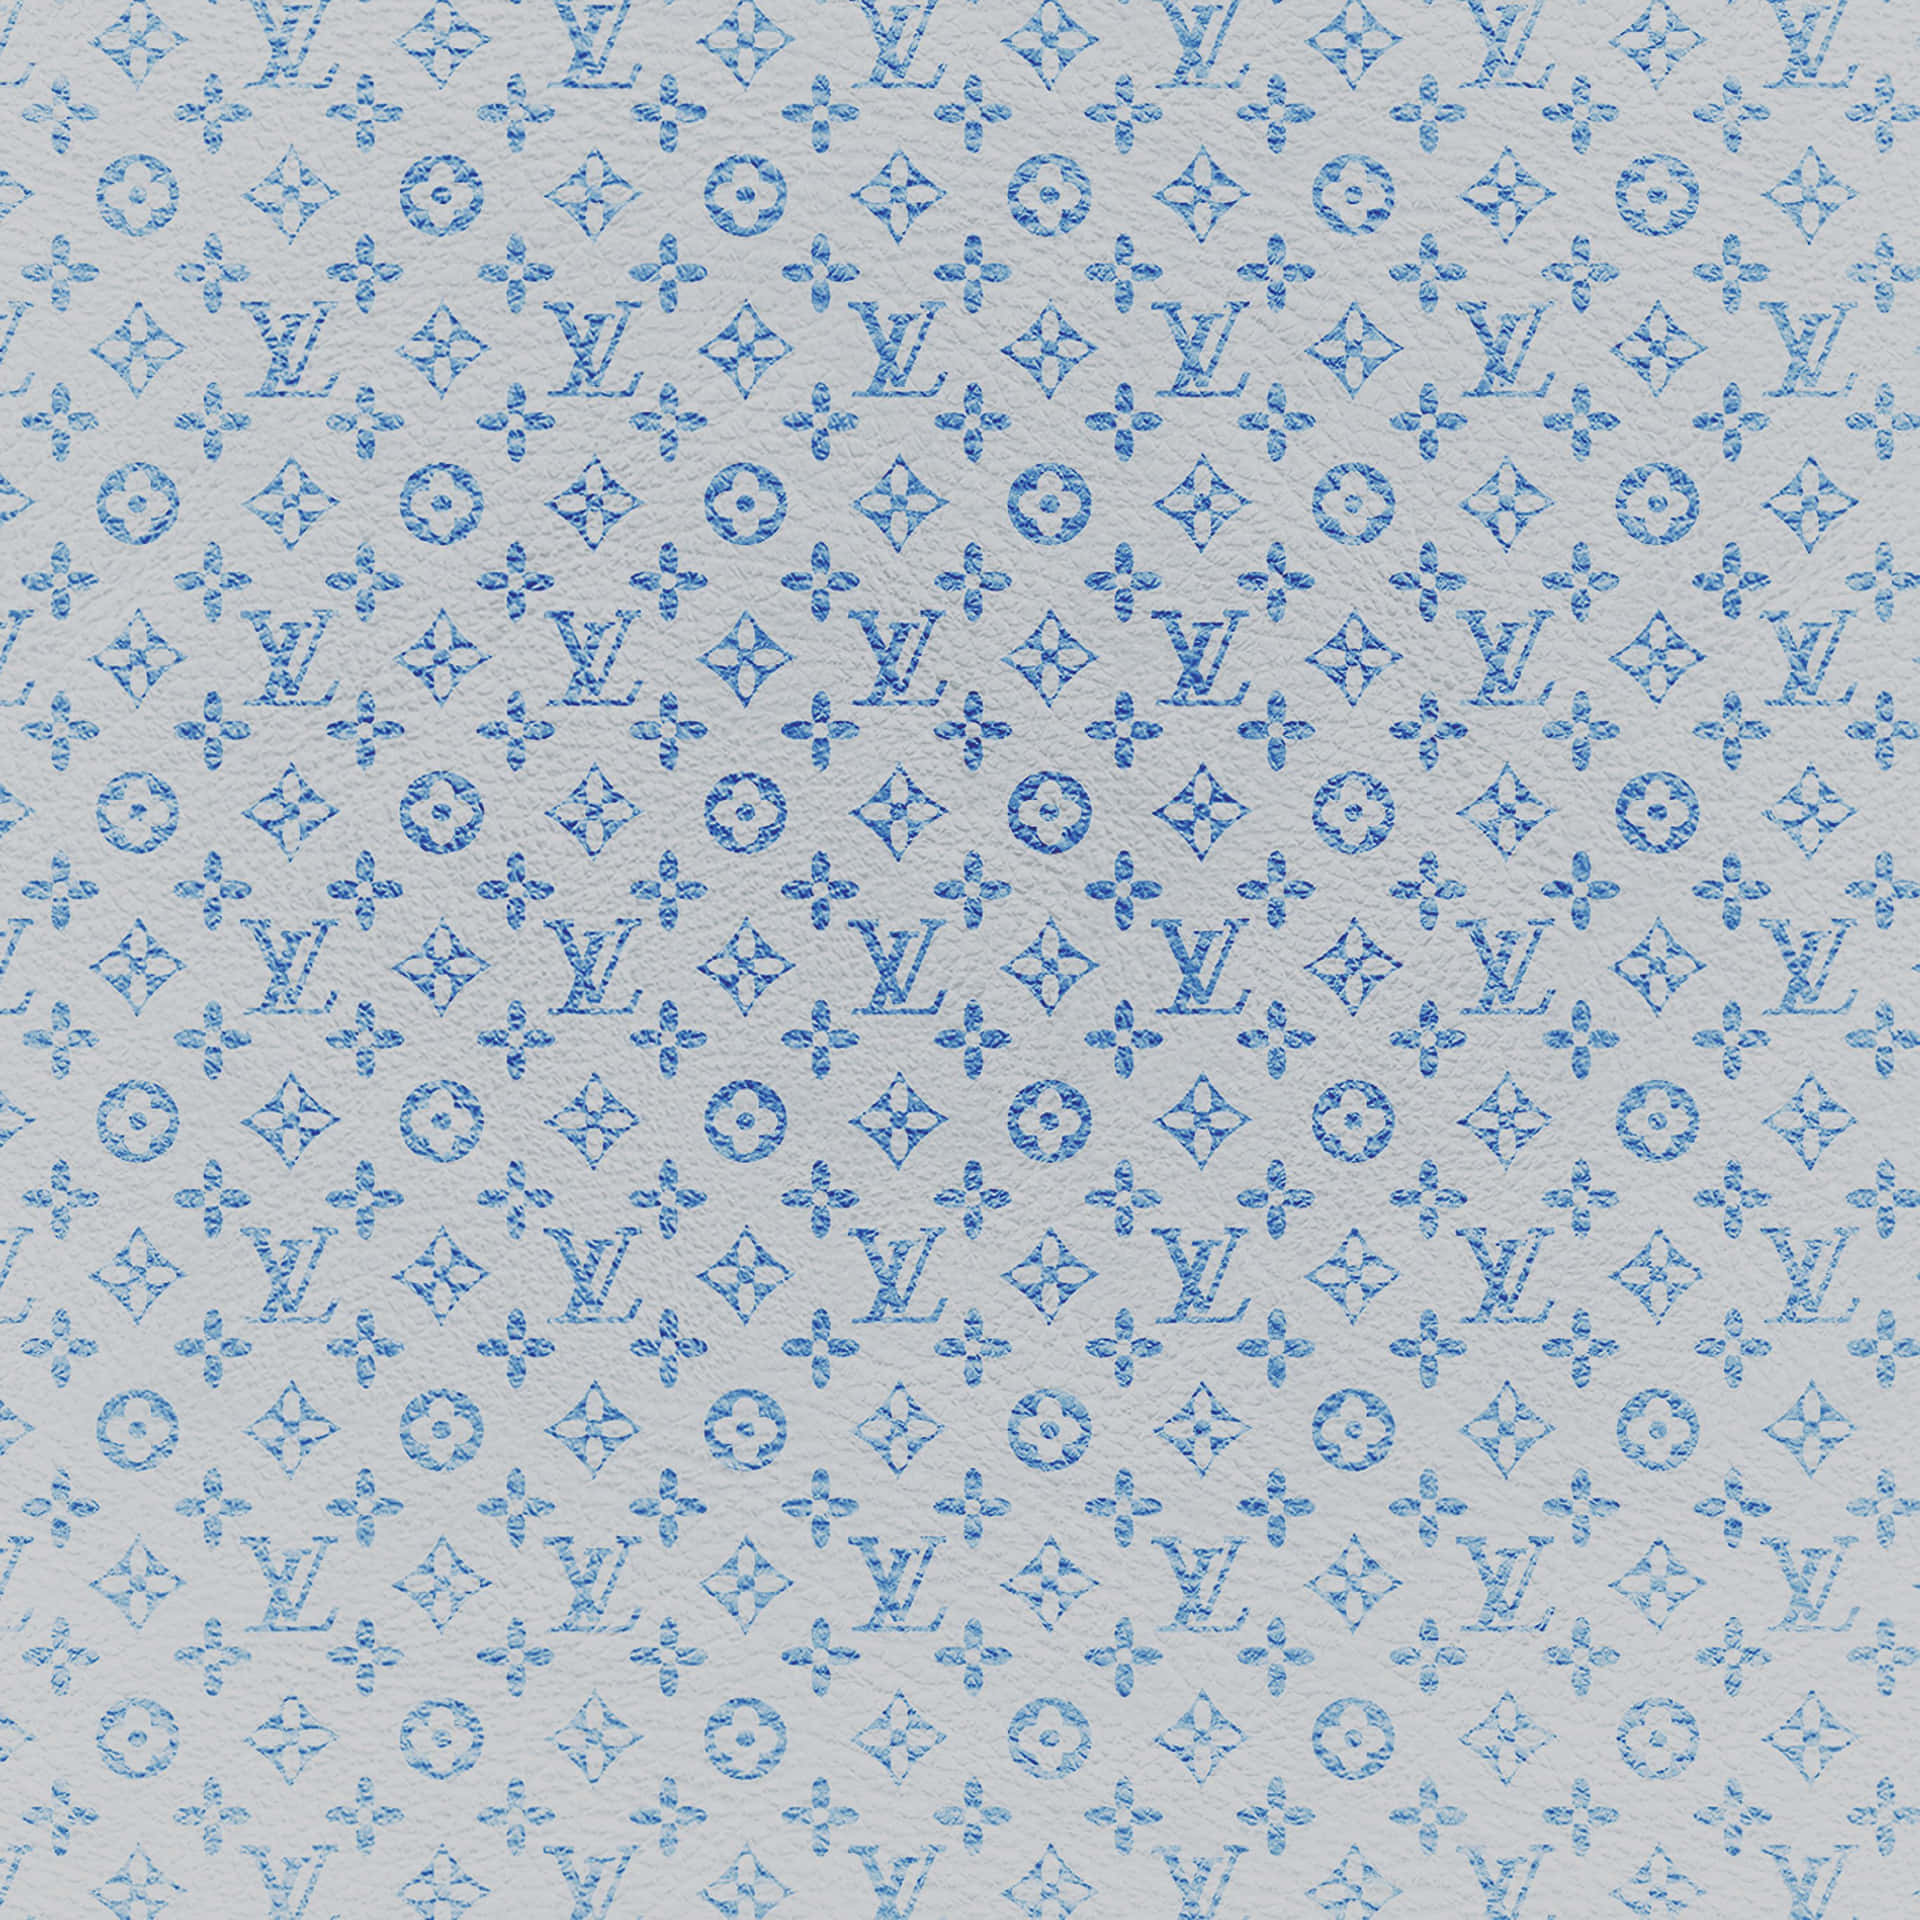 Download Add a unique touch to your wardrobe with a classic Louis Vuitton  print Wallpaper